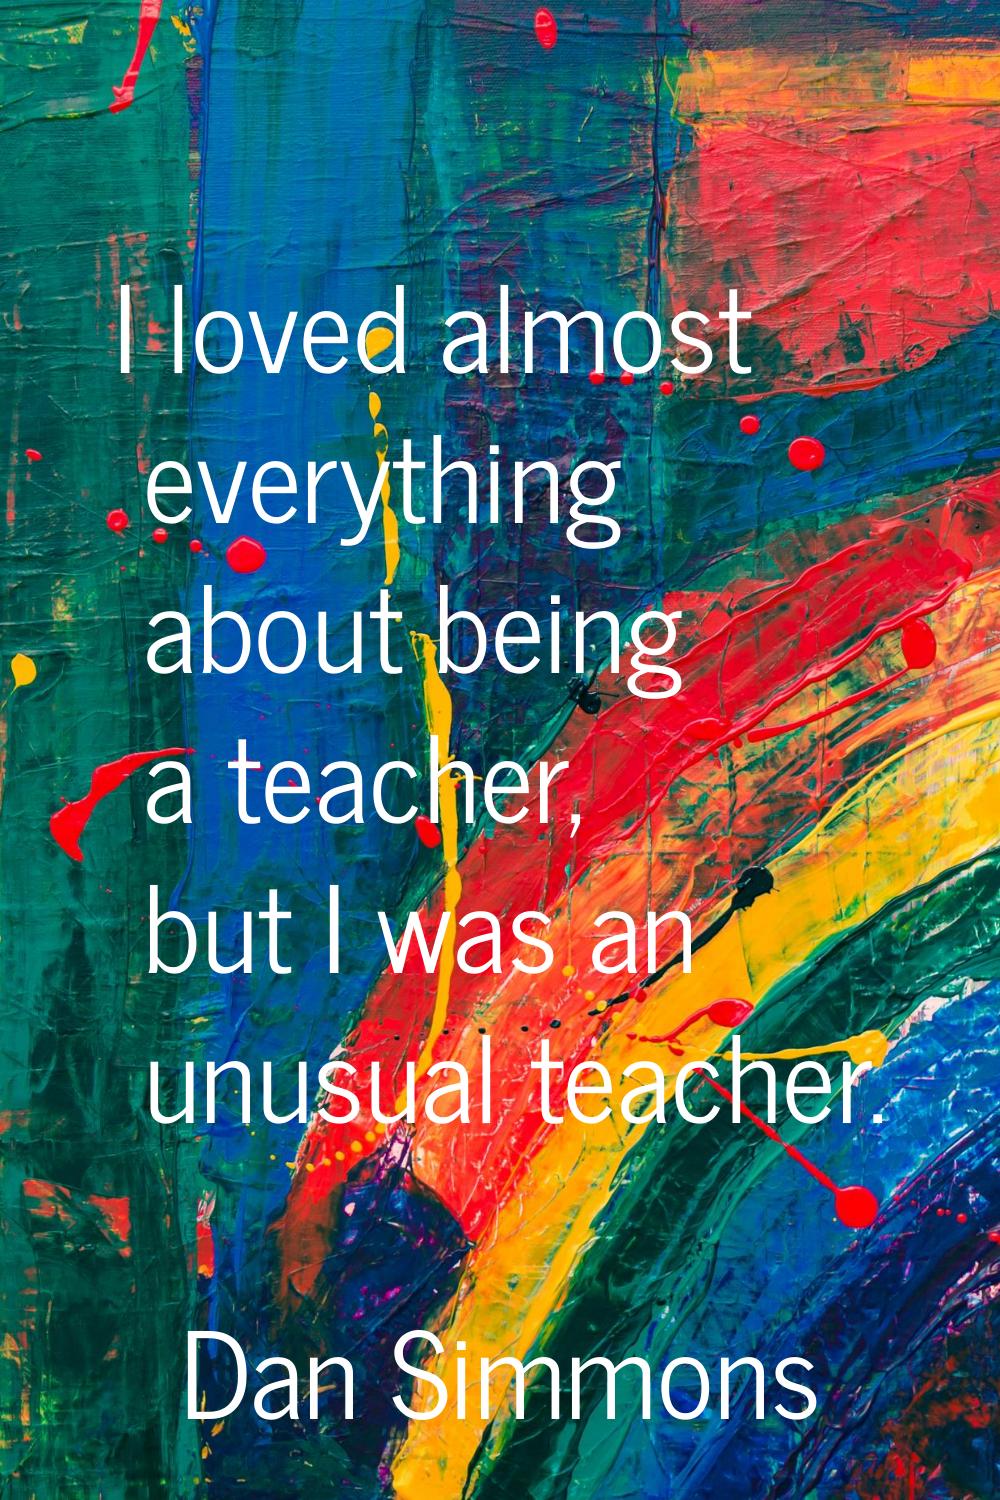 I loved almost everything about being a teacher, but I was an unusual teacher.